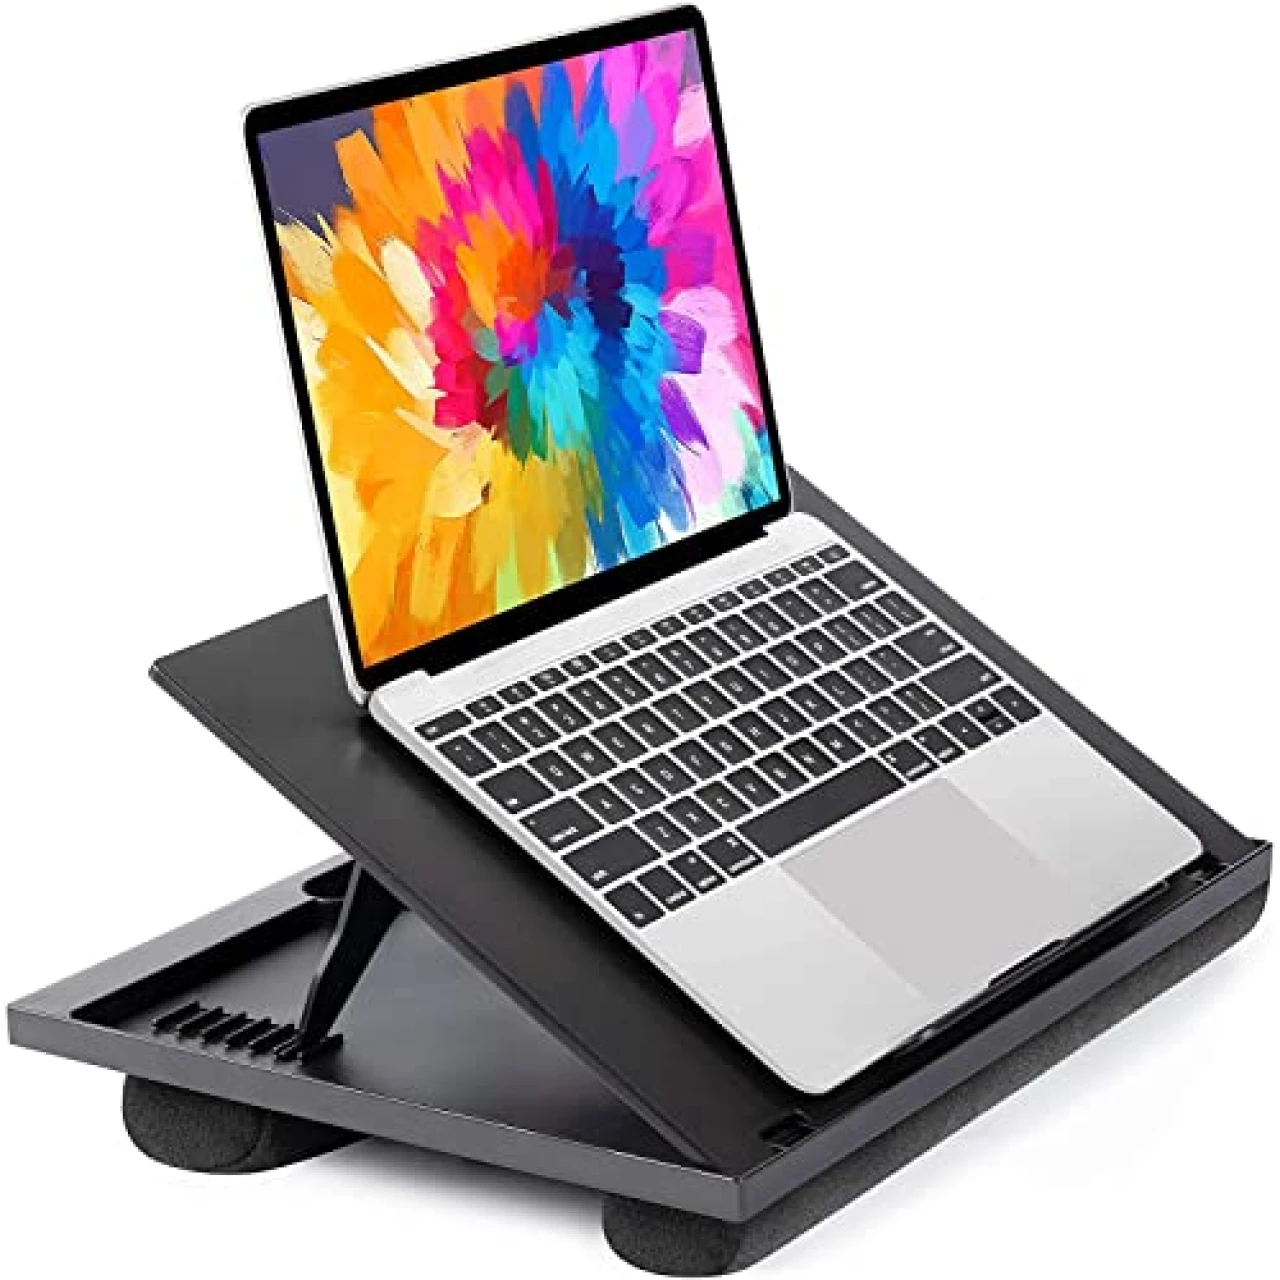 Adjustable Lap Desk - with 8 Adjustable Angles &amp; Dual Cushions Laptop Stand for Car Laptop Desk, Work Table, Lap Writing Board &amp; Drawing Desk on Sofa or Bed by HUANUO